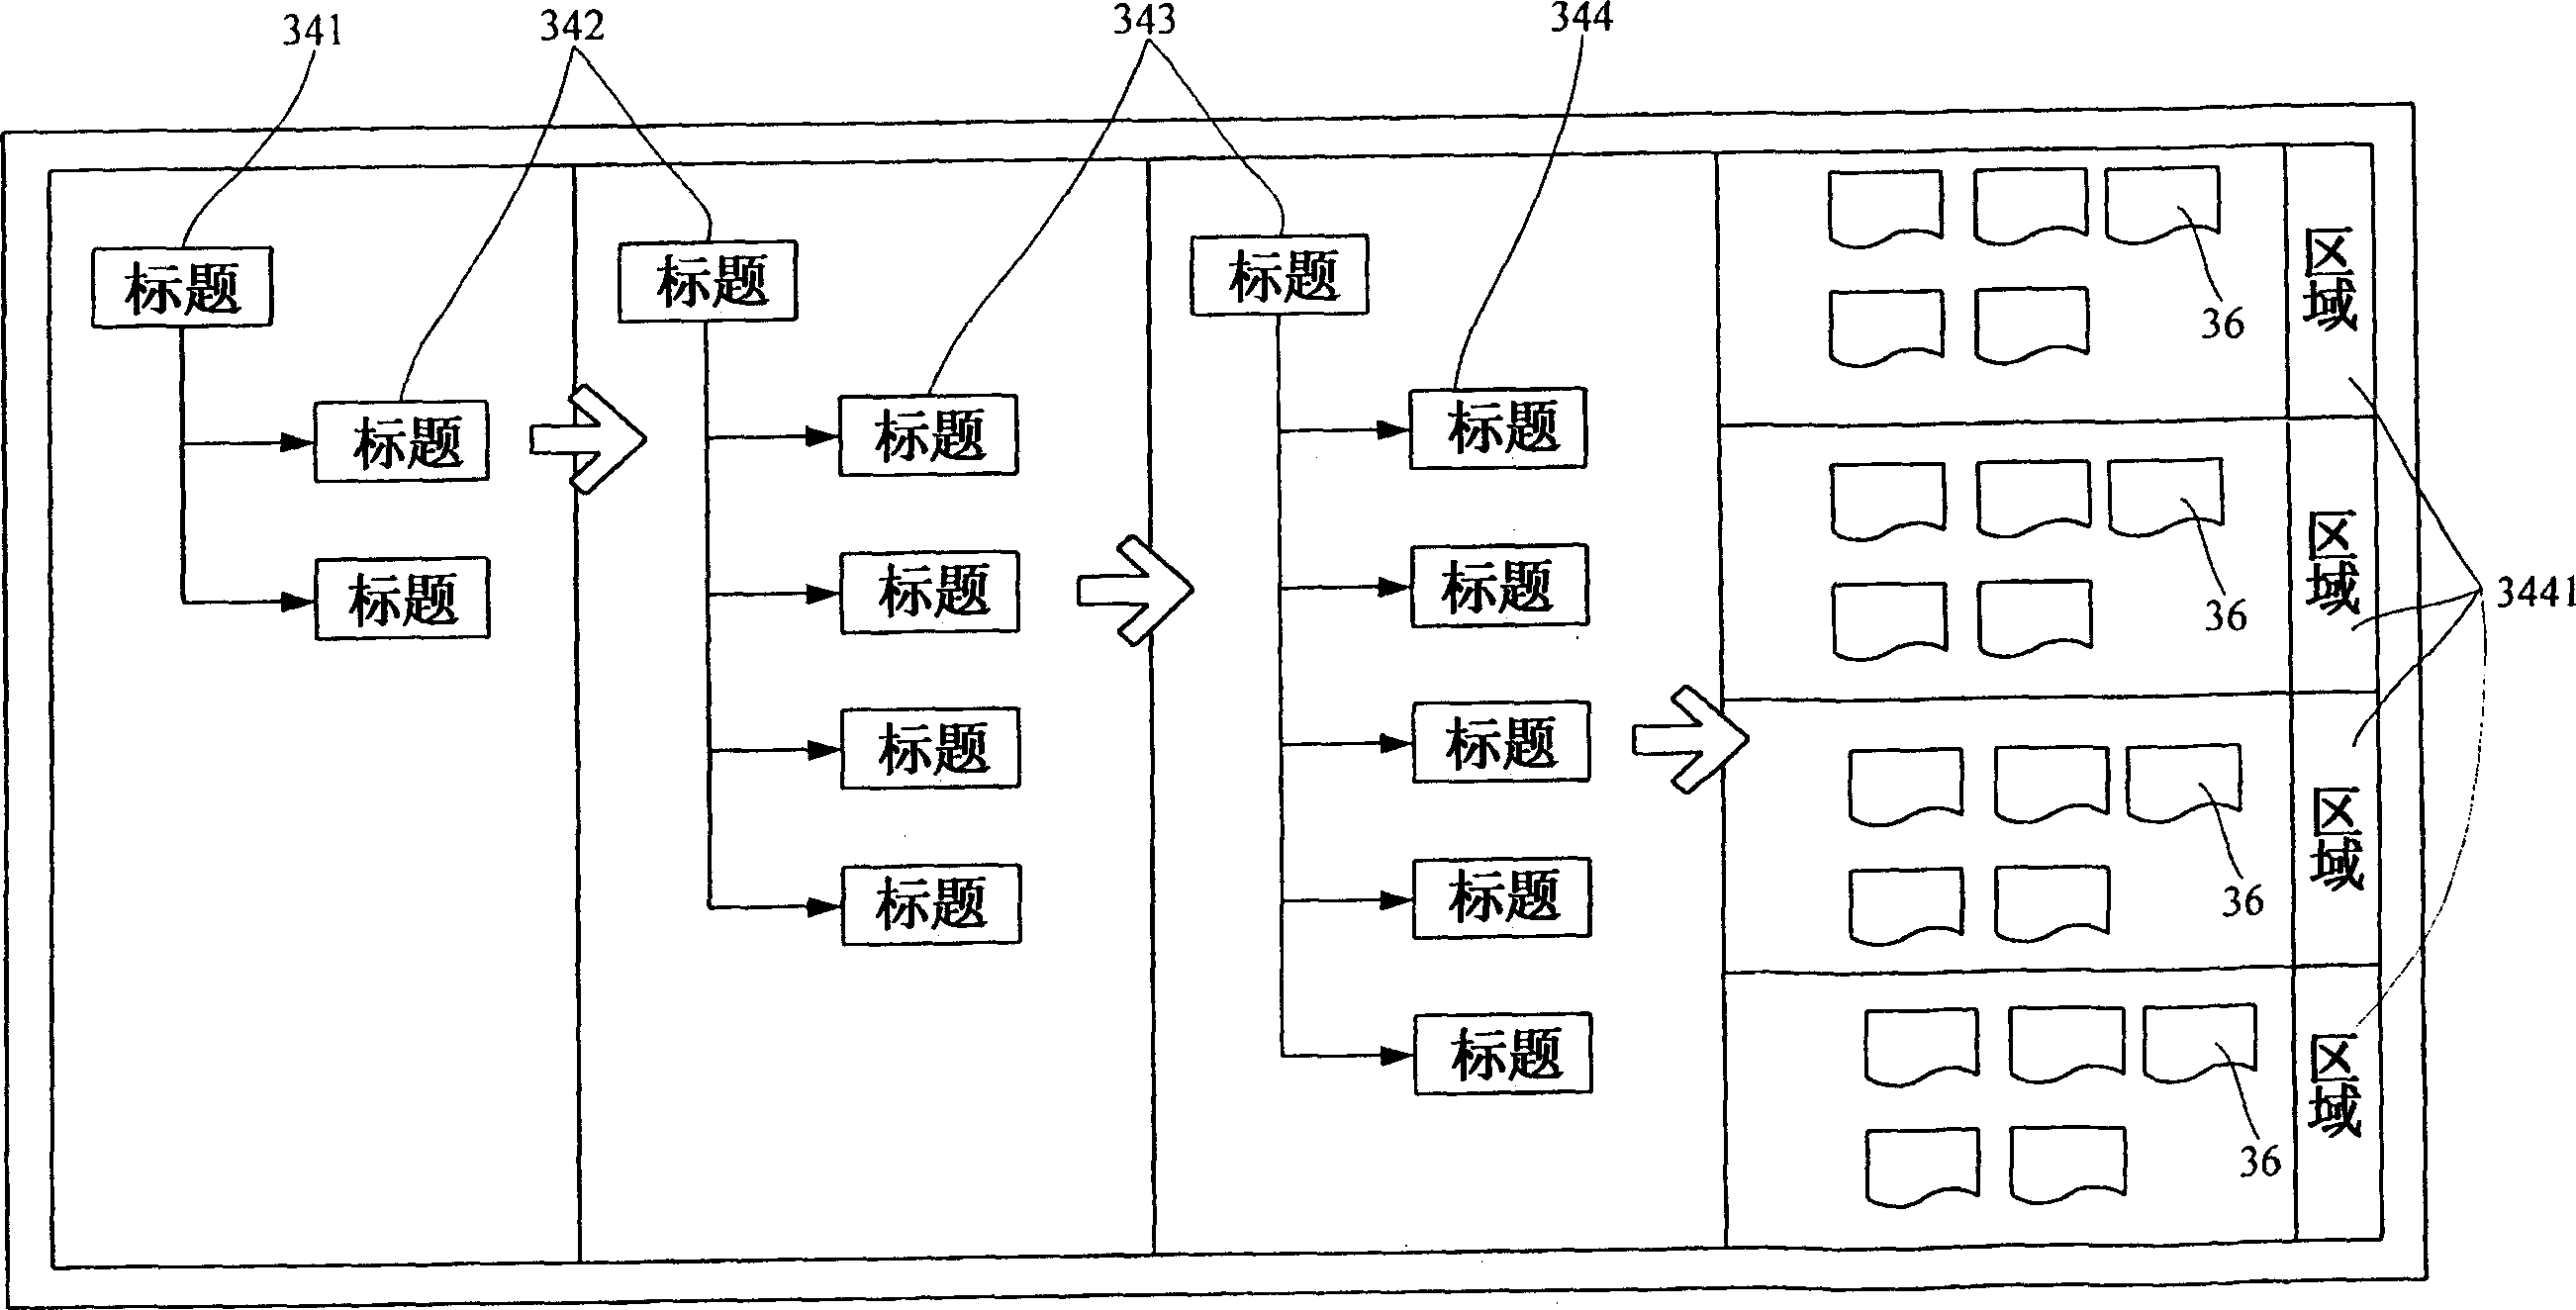 Flow guiding knowledge management system and method